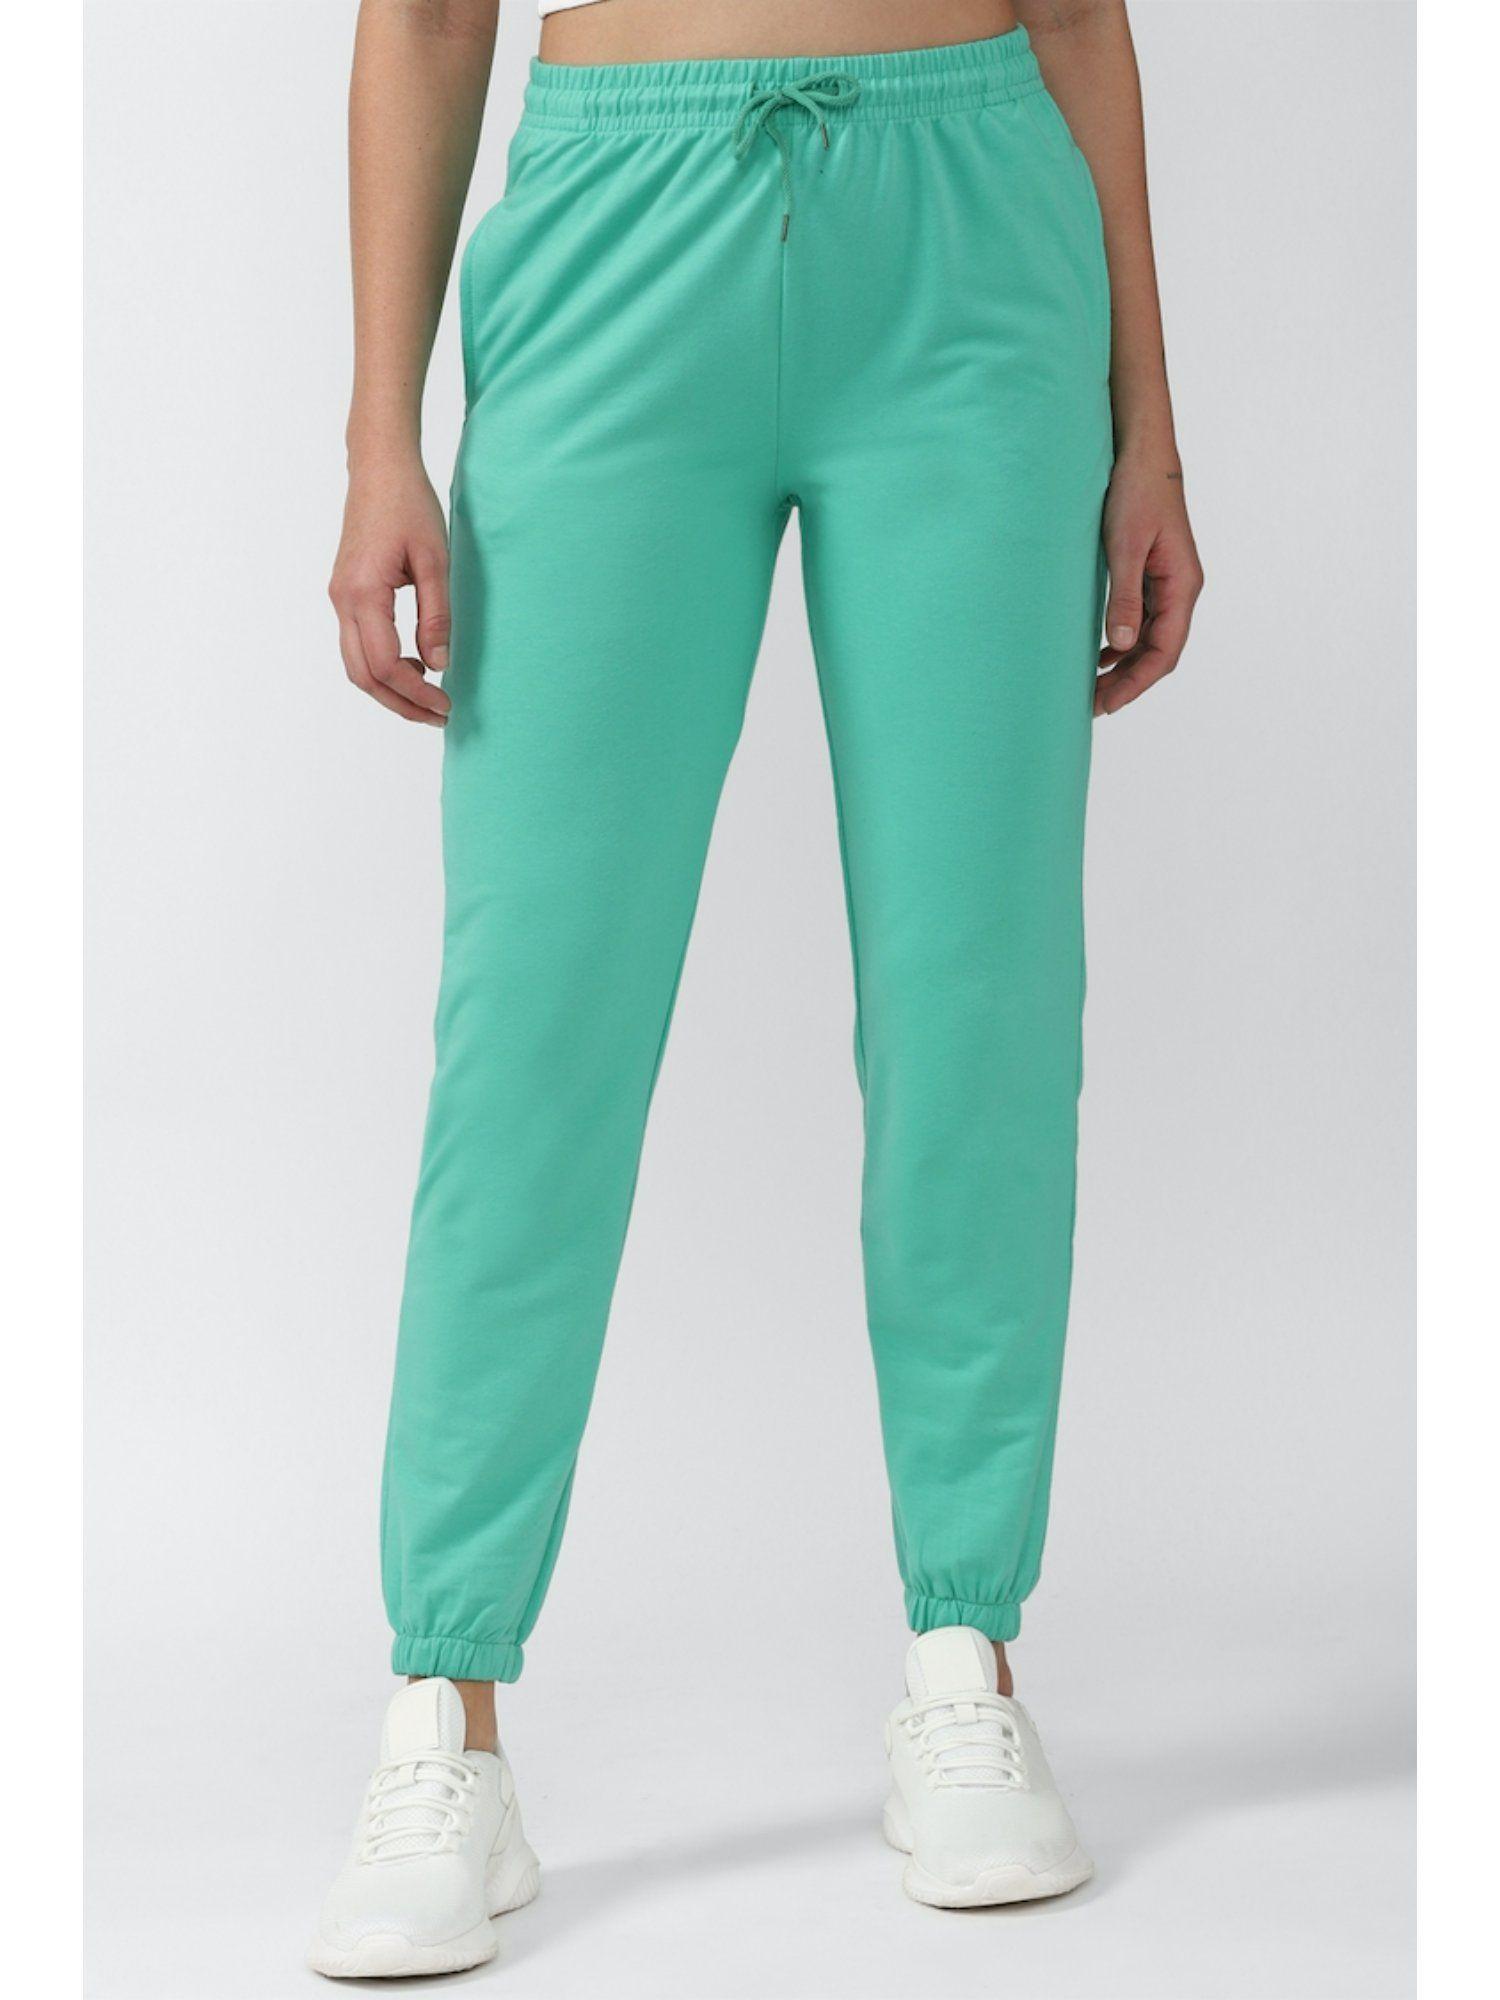 green solid pants